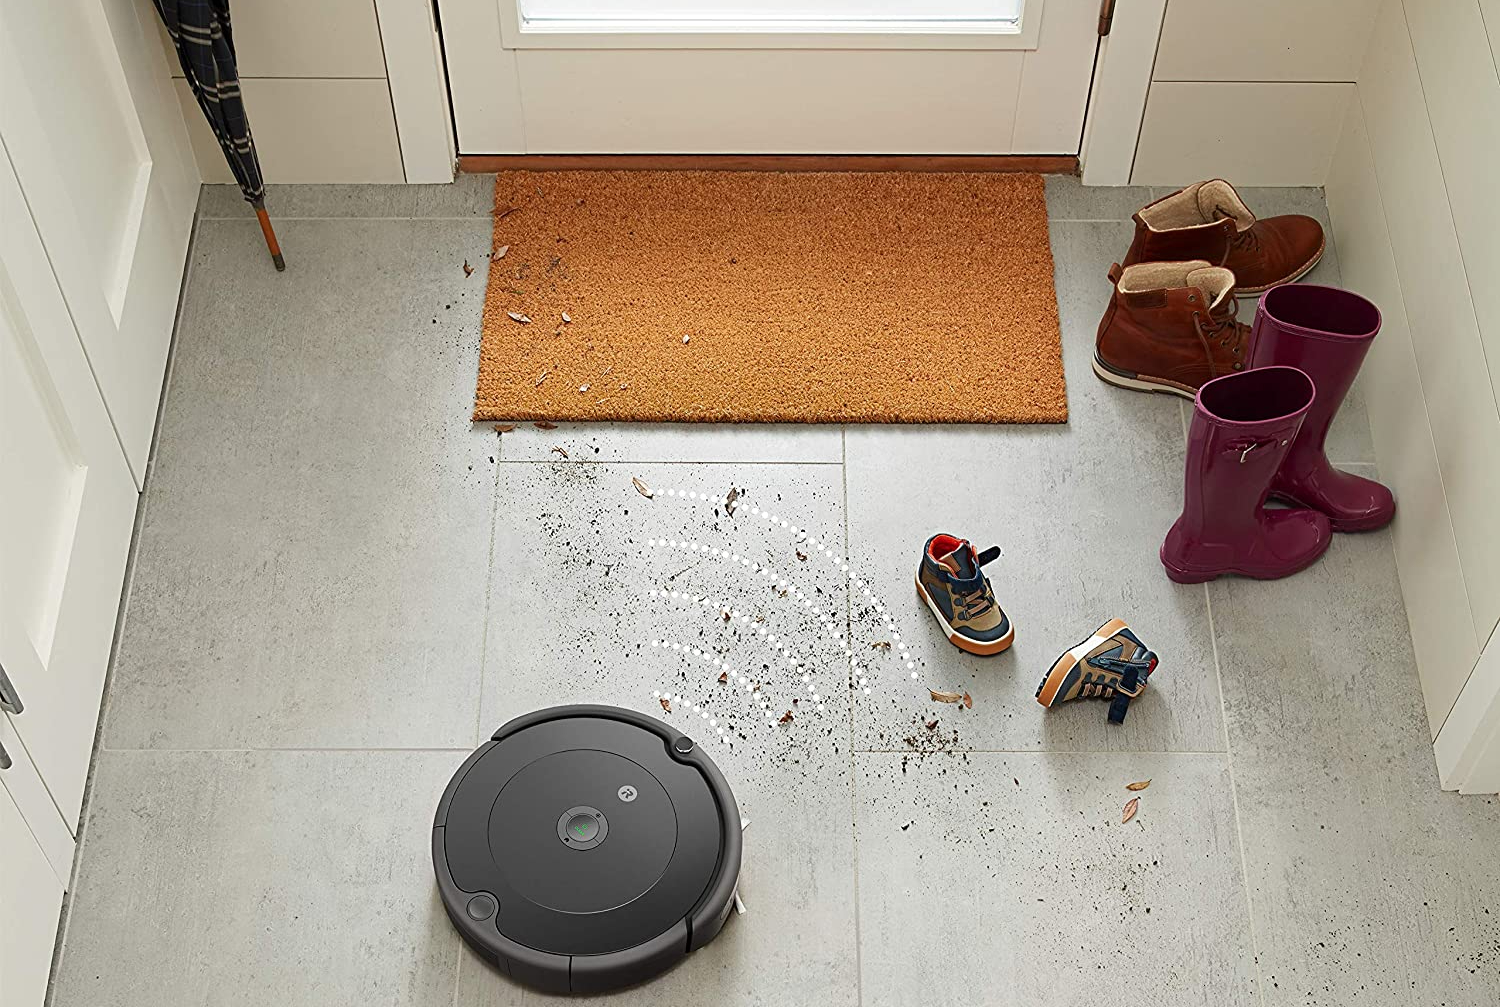 iRobot Roomba i Series, Privacy & security guide